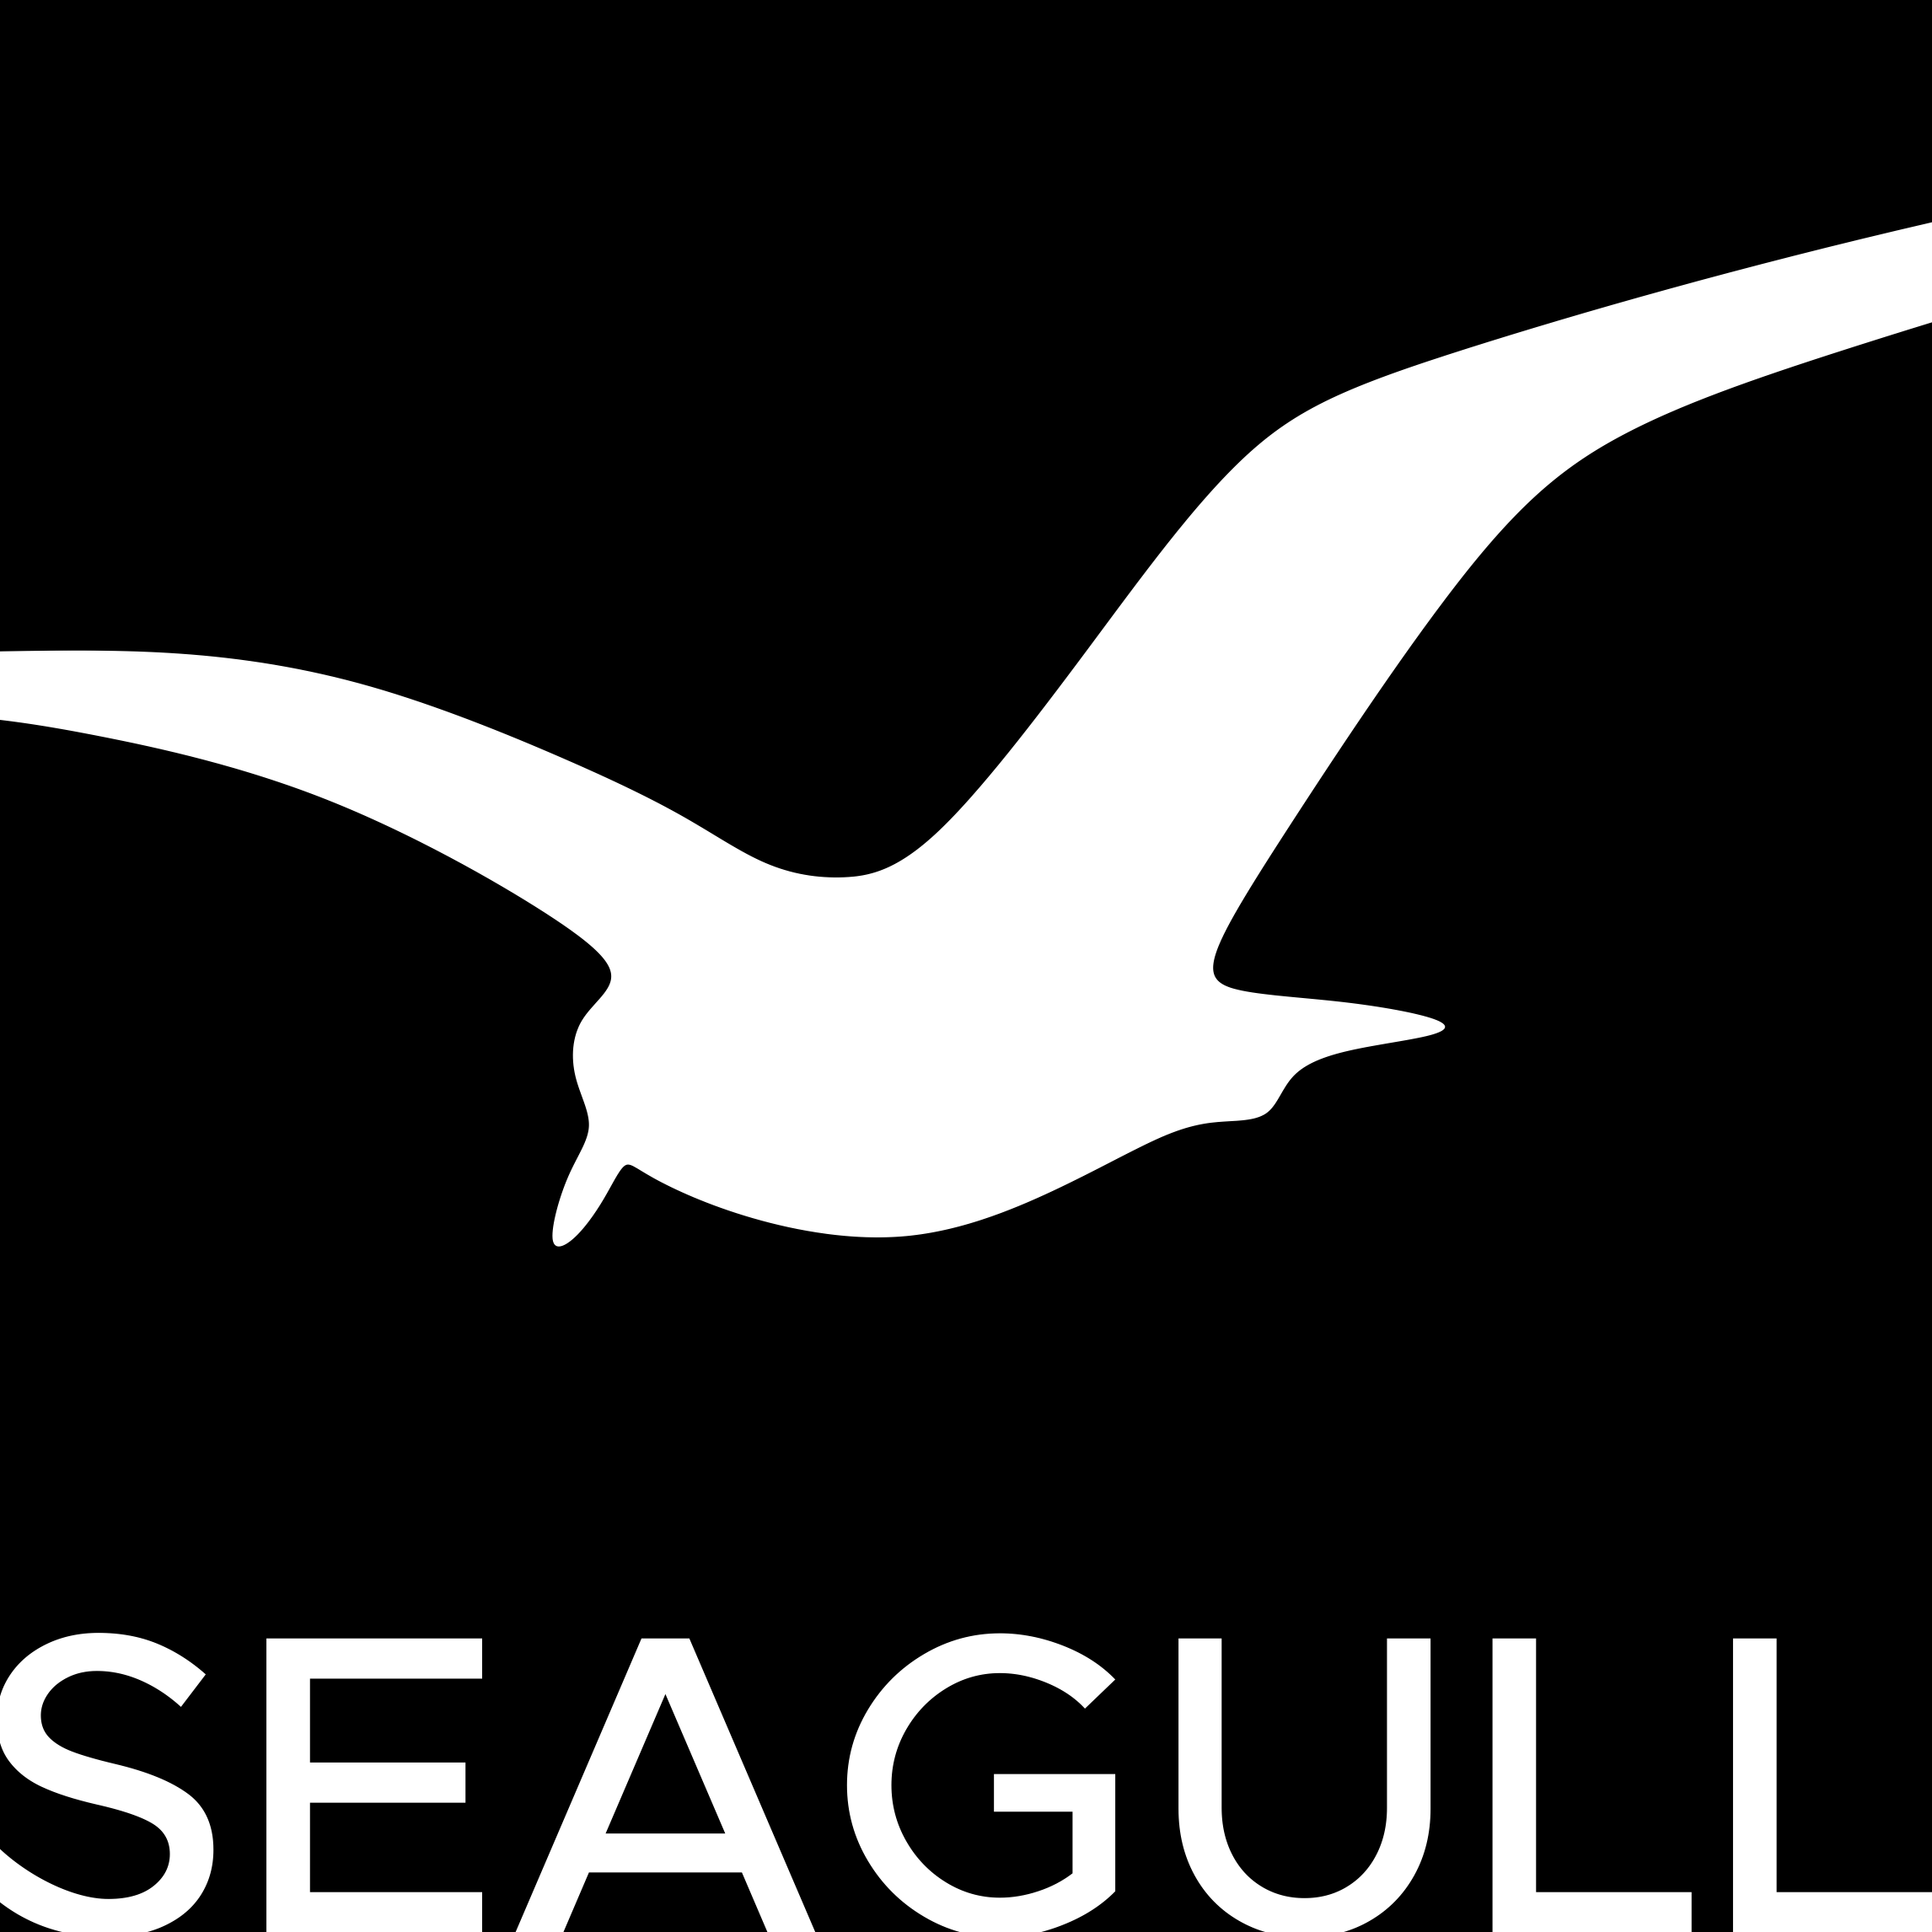 Seagull, Inc. profile on Qualified.One